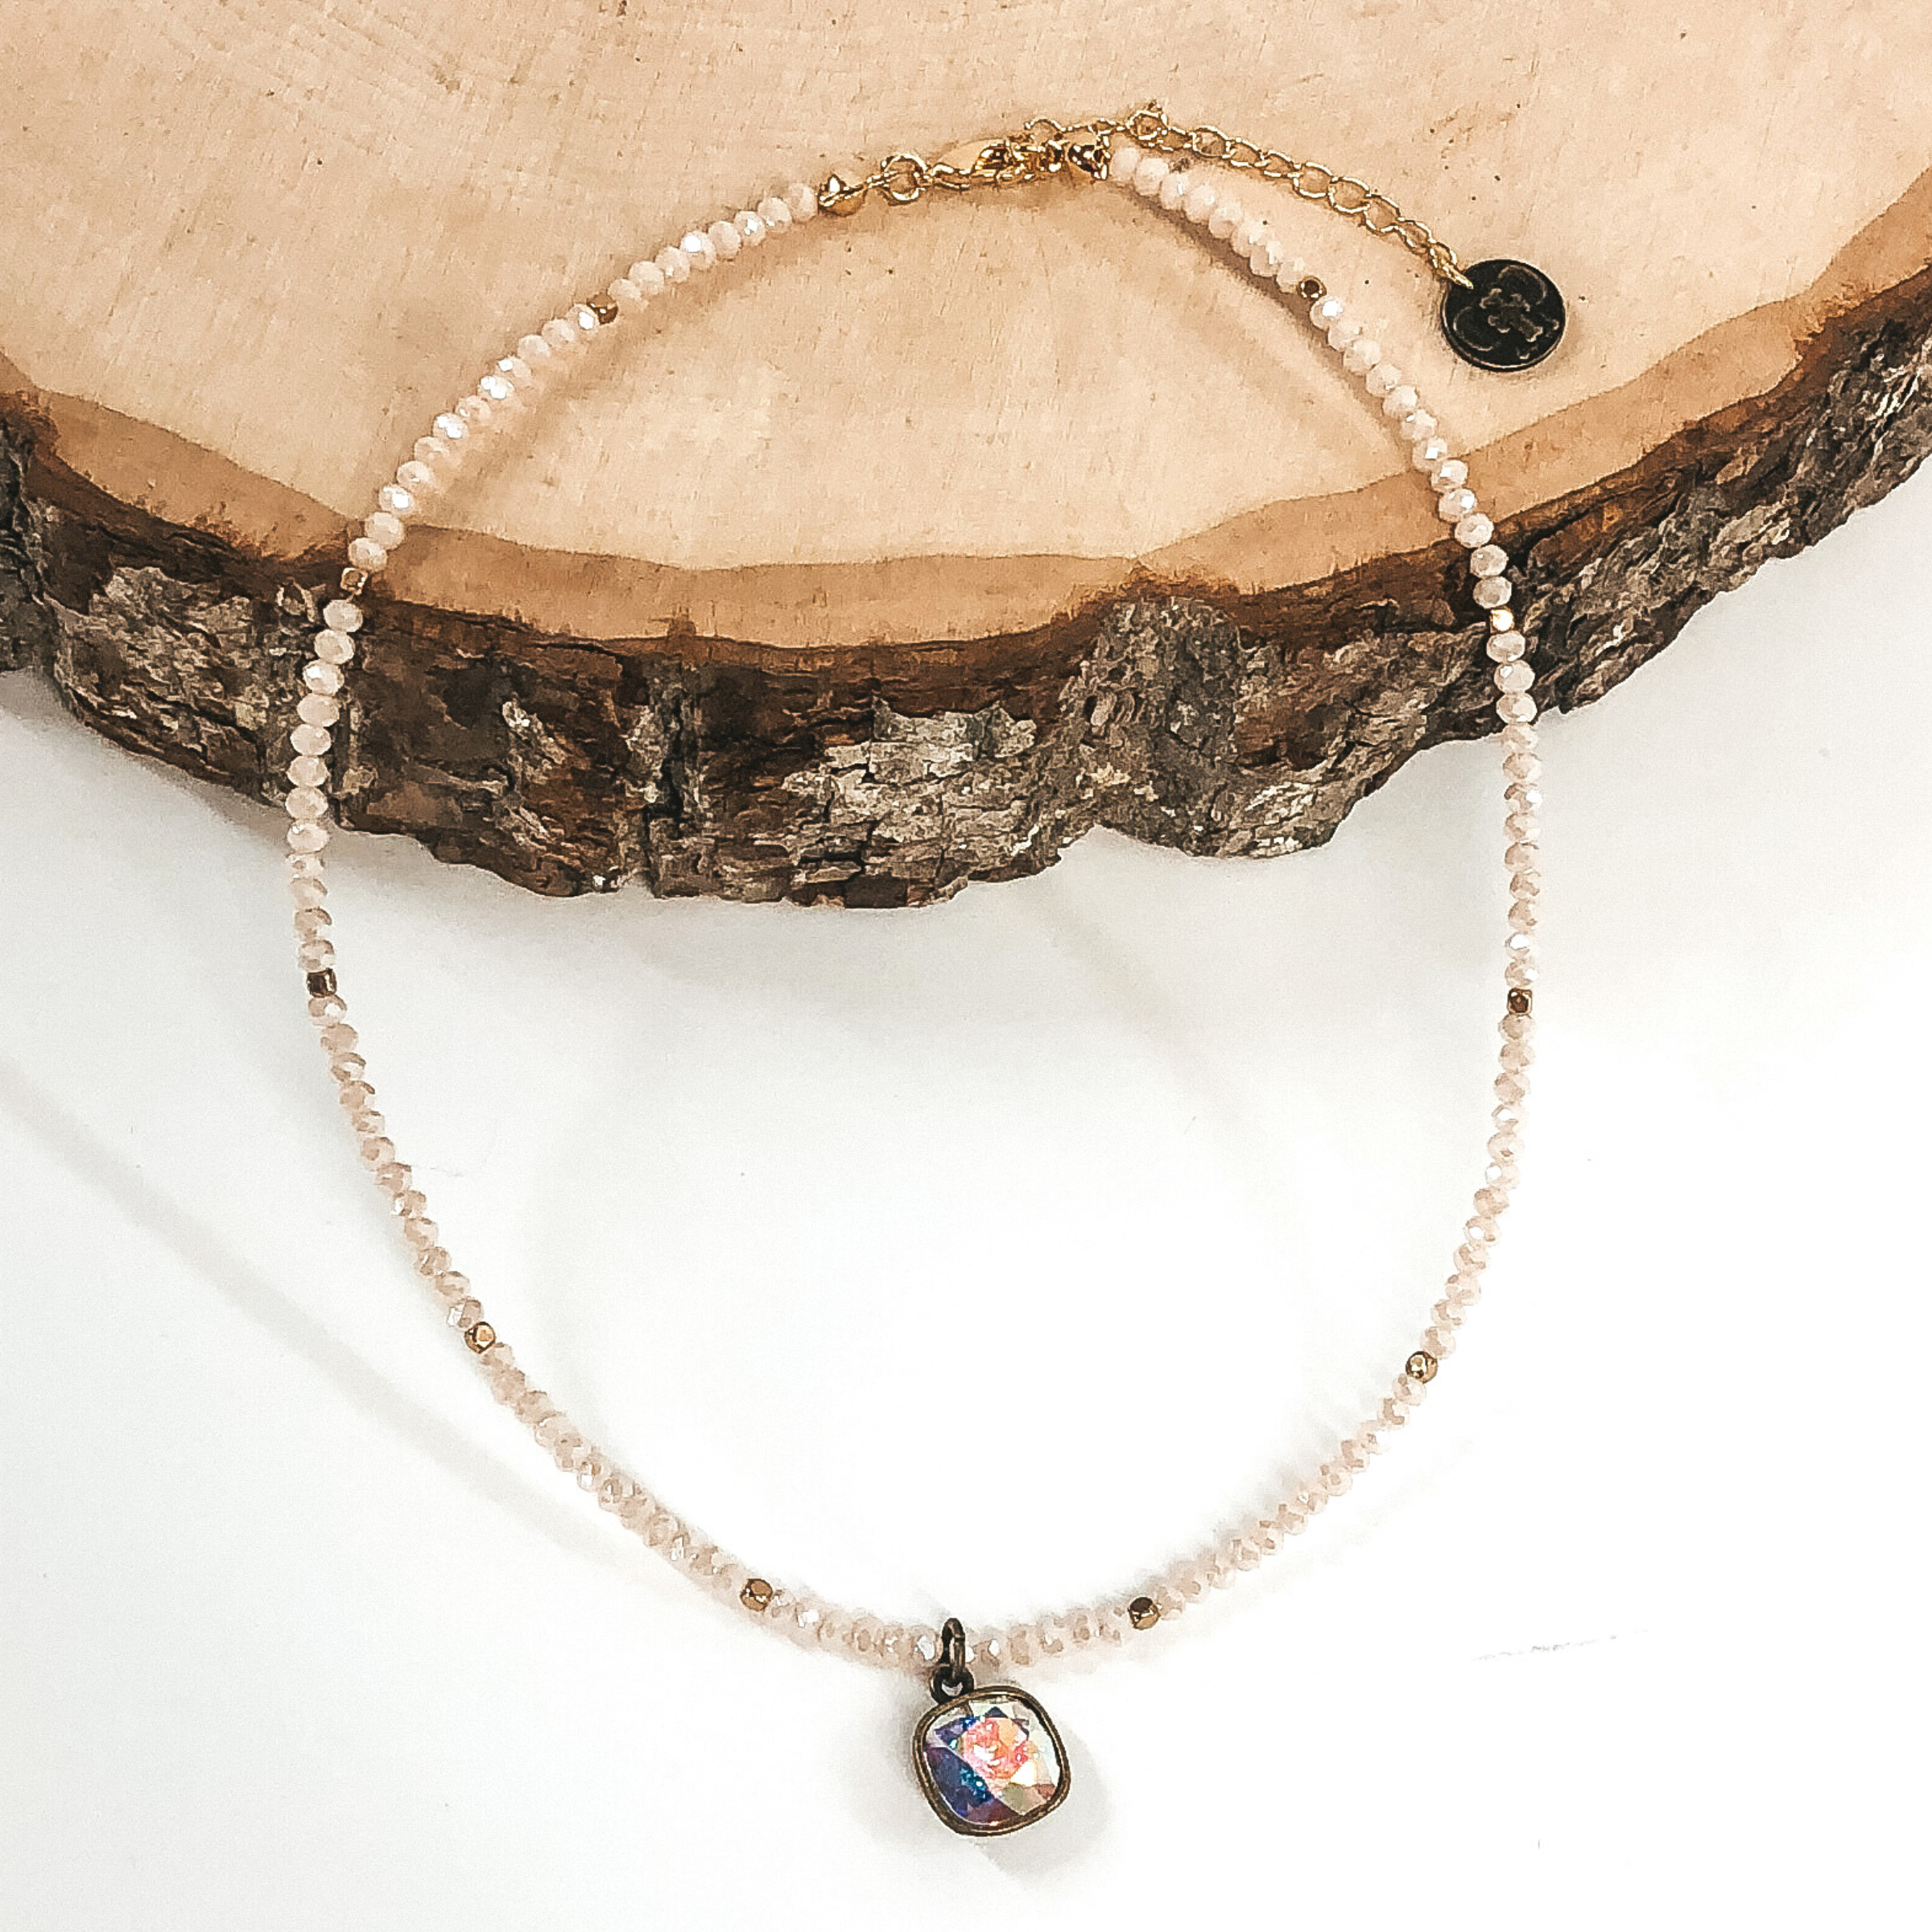 This necklace has blush crystal beads for the necklace with gold beaded spacers. There is also a single hanging cushion cut AB crystal in a bronze setting. This necklace is pictured laying partially on a piece of wood on a white background. 